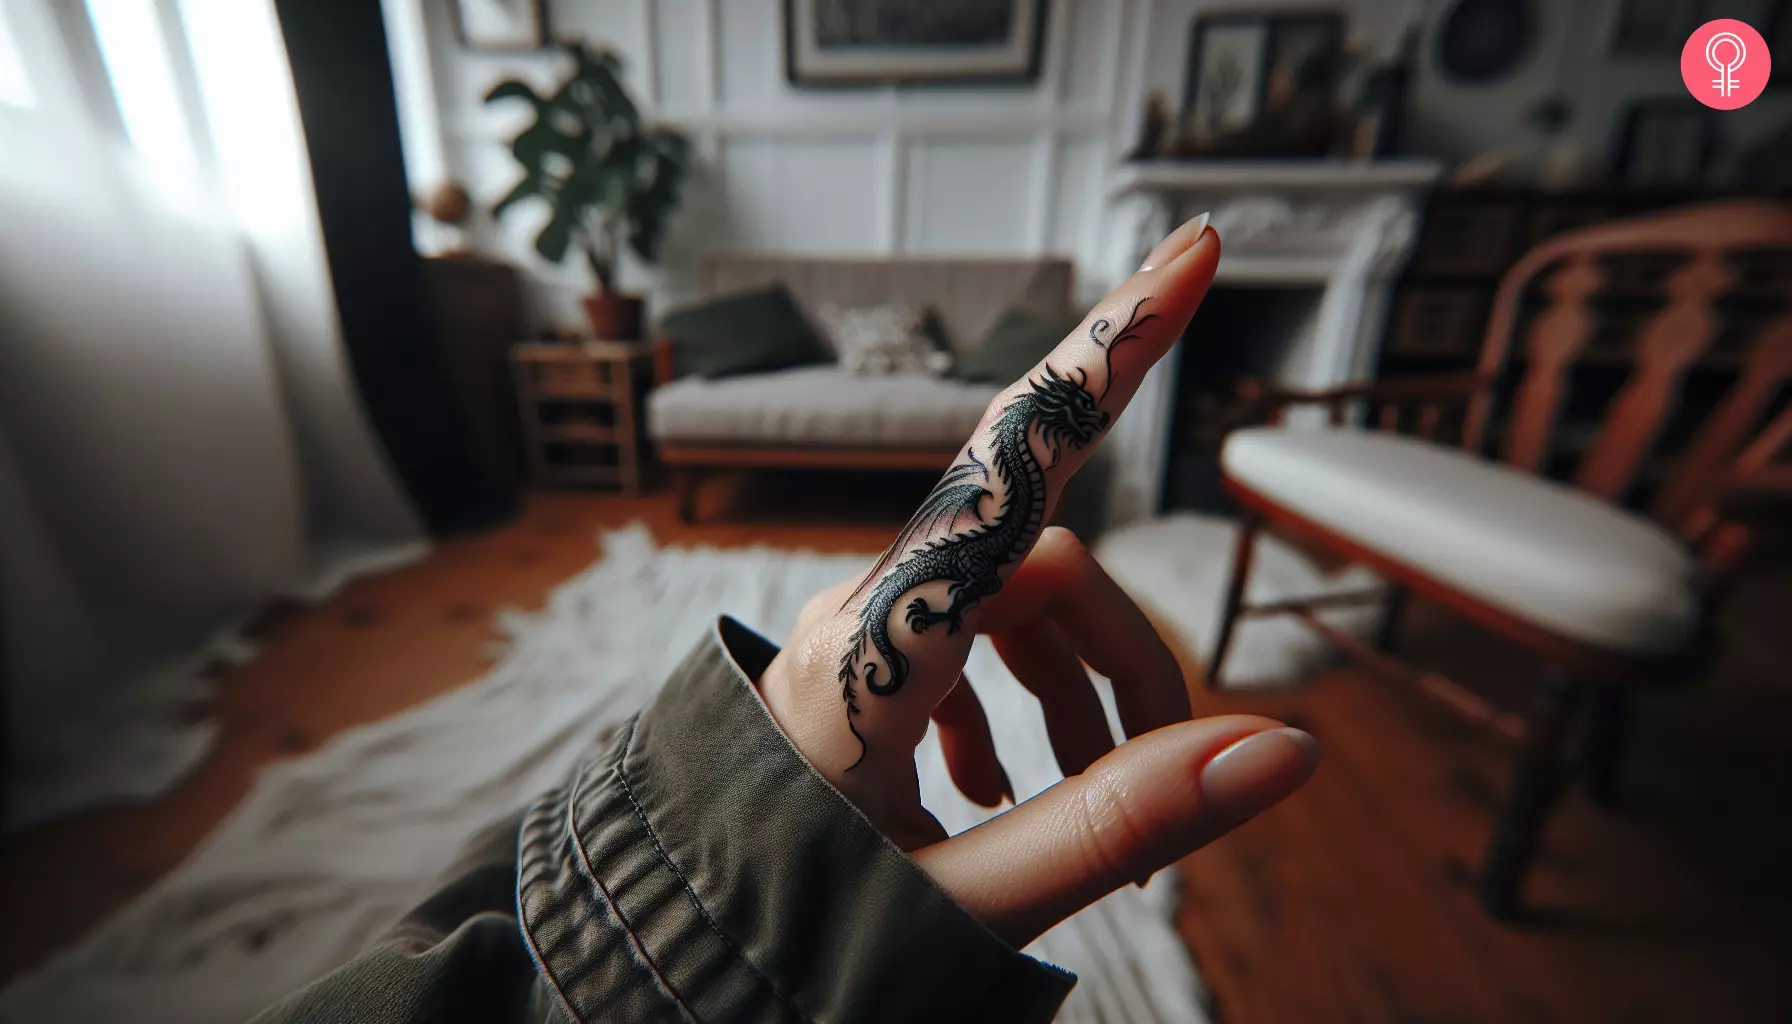 Elegant and small dragon tattoo on the finger of a woman